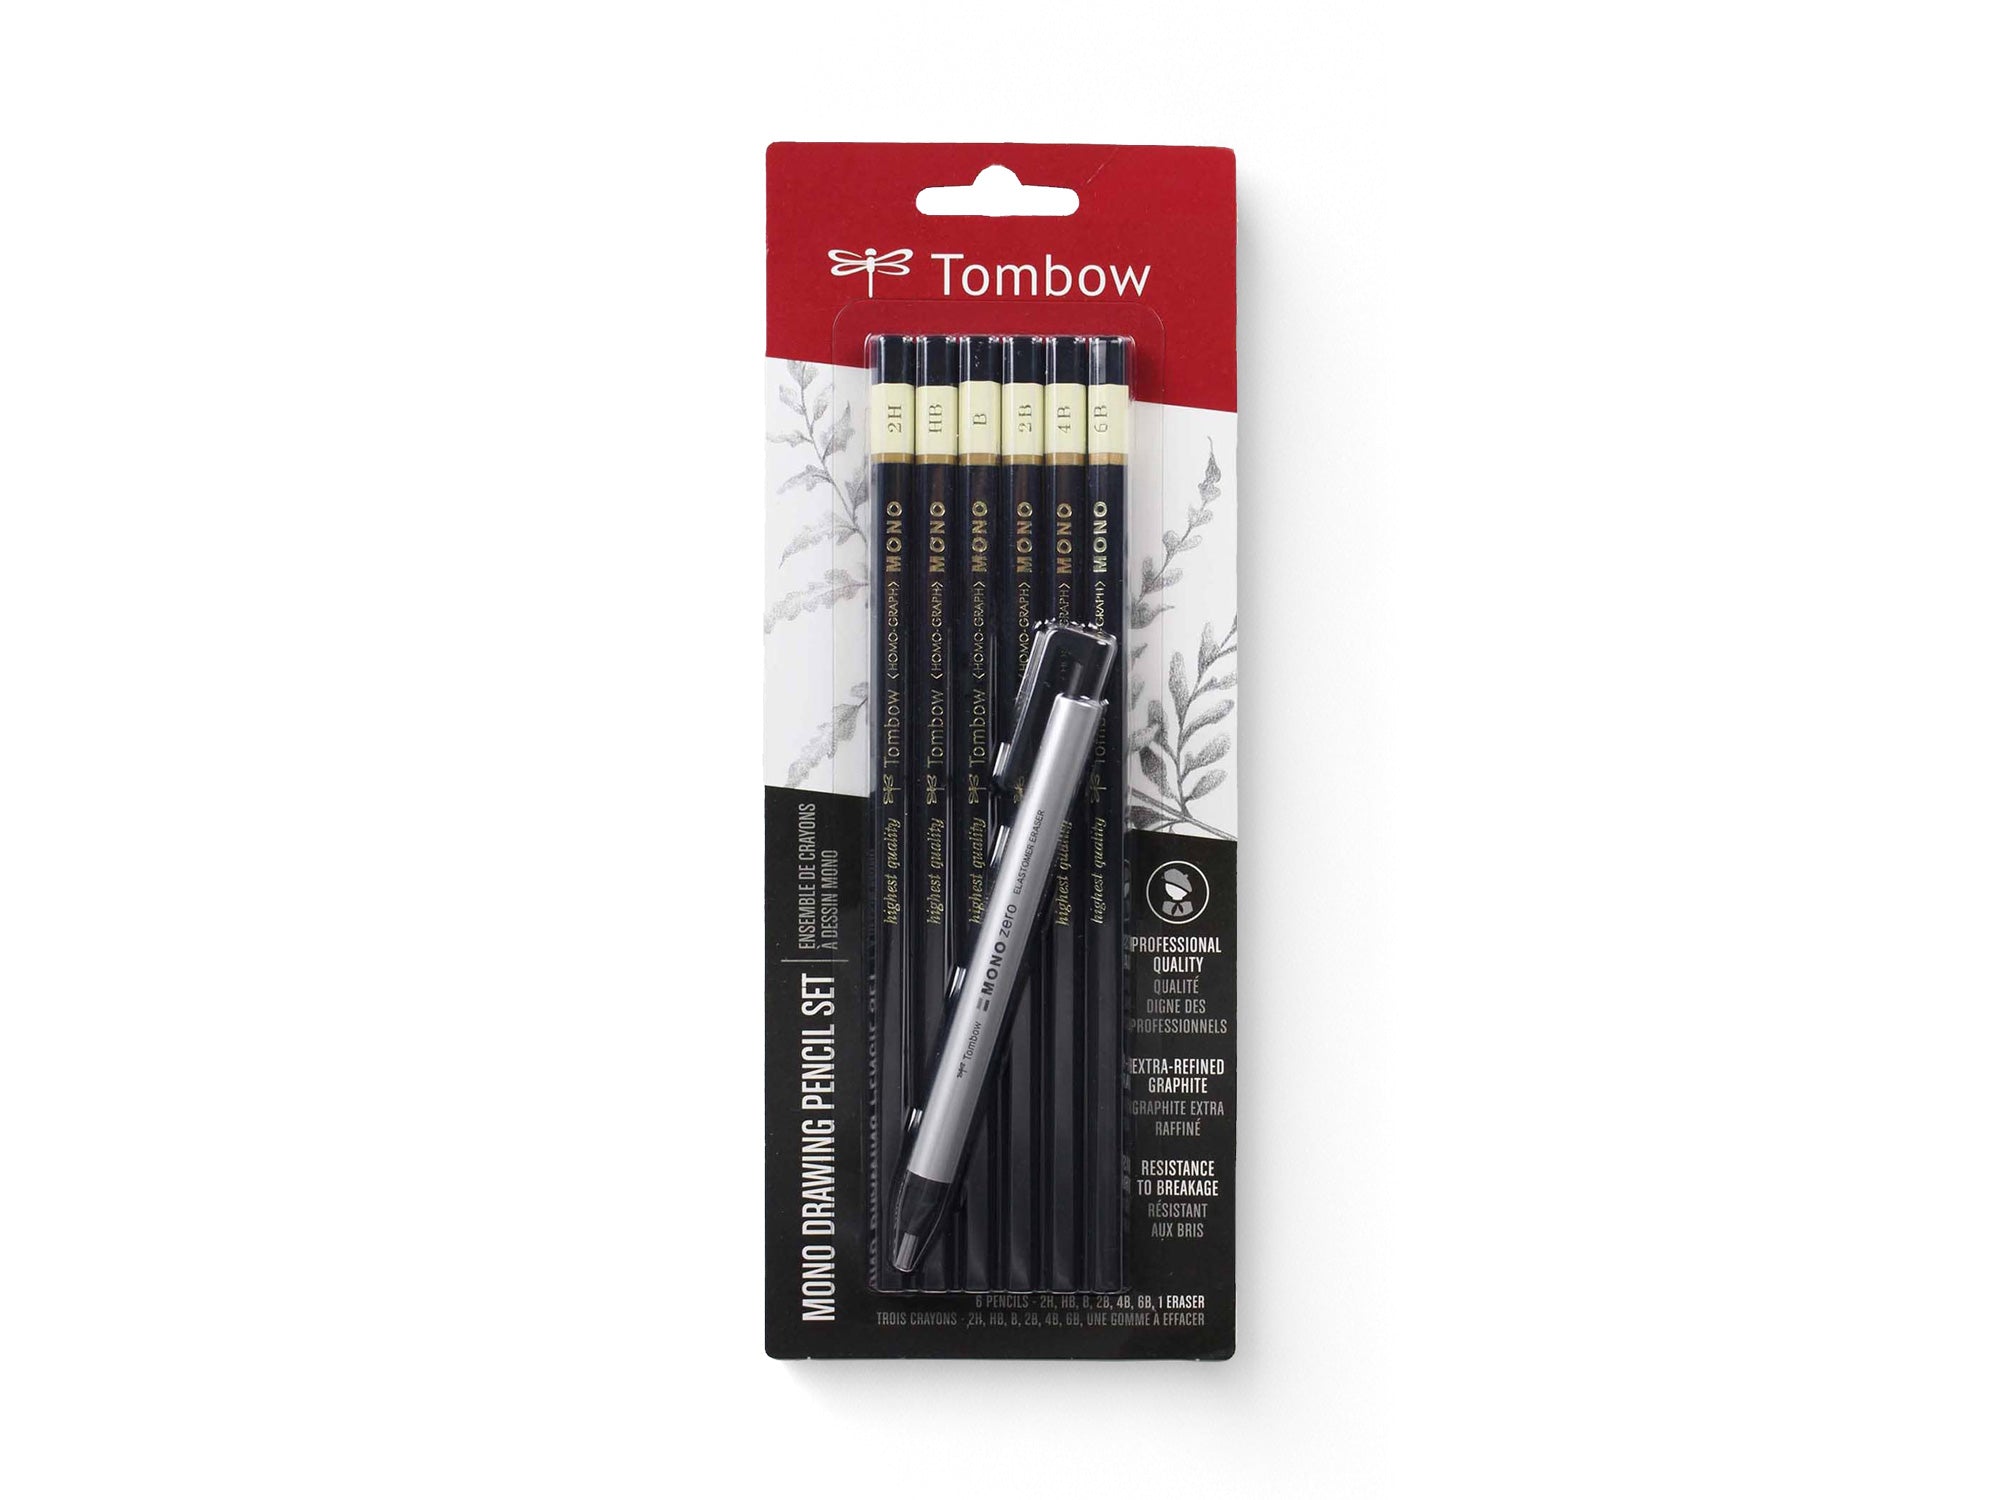 MONO Drawing Pencil  Tombow Professional Drawing & Art Pencil